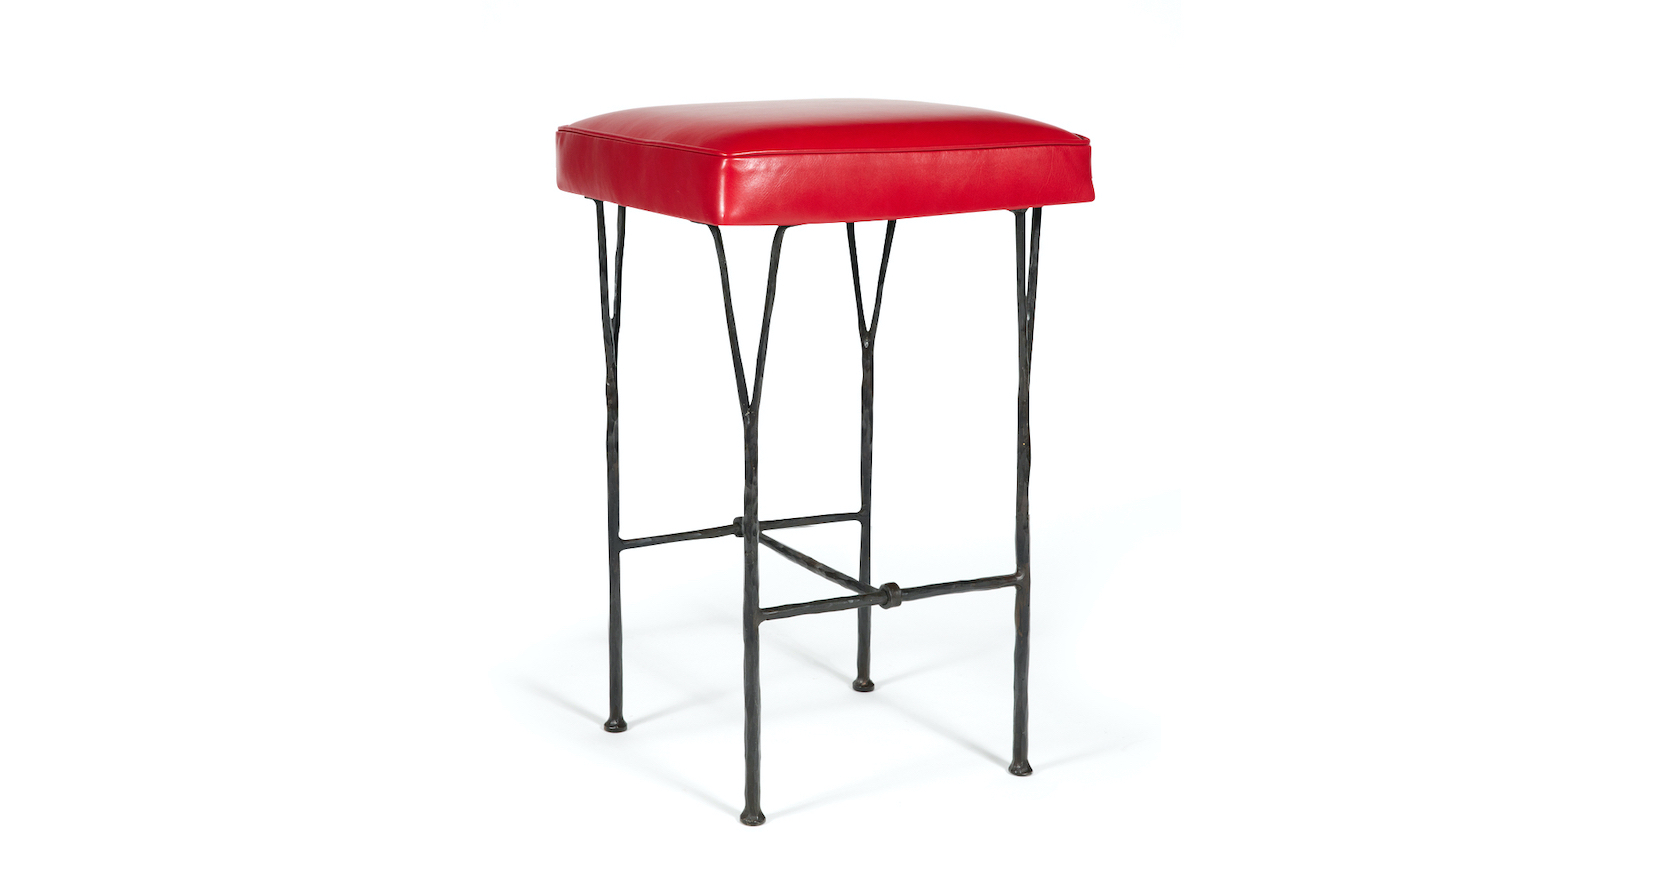 Garouste Bonetti, minimalist high bar stool with black wrought iron legs that split upwards into forks that support the upholstered red leather seat